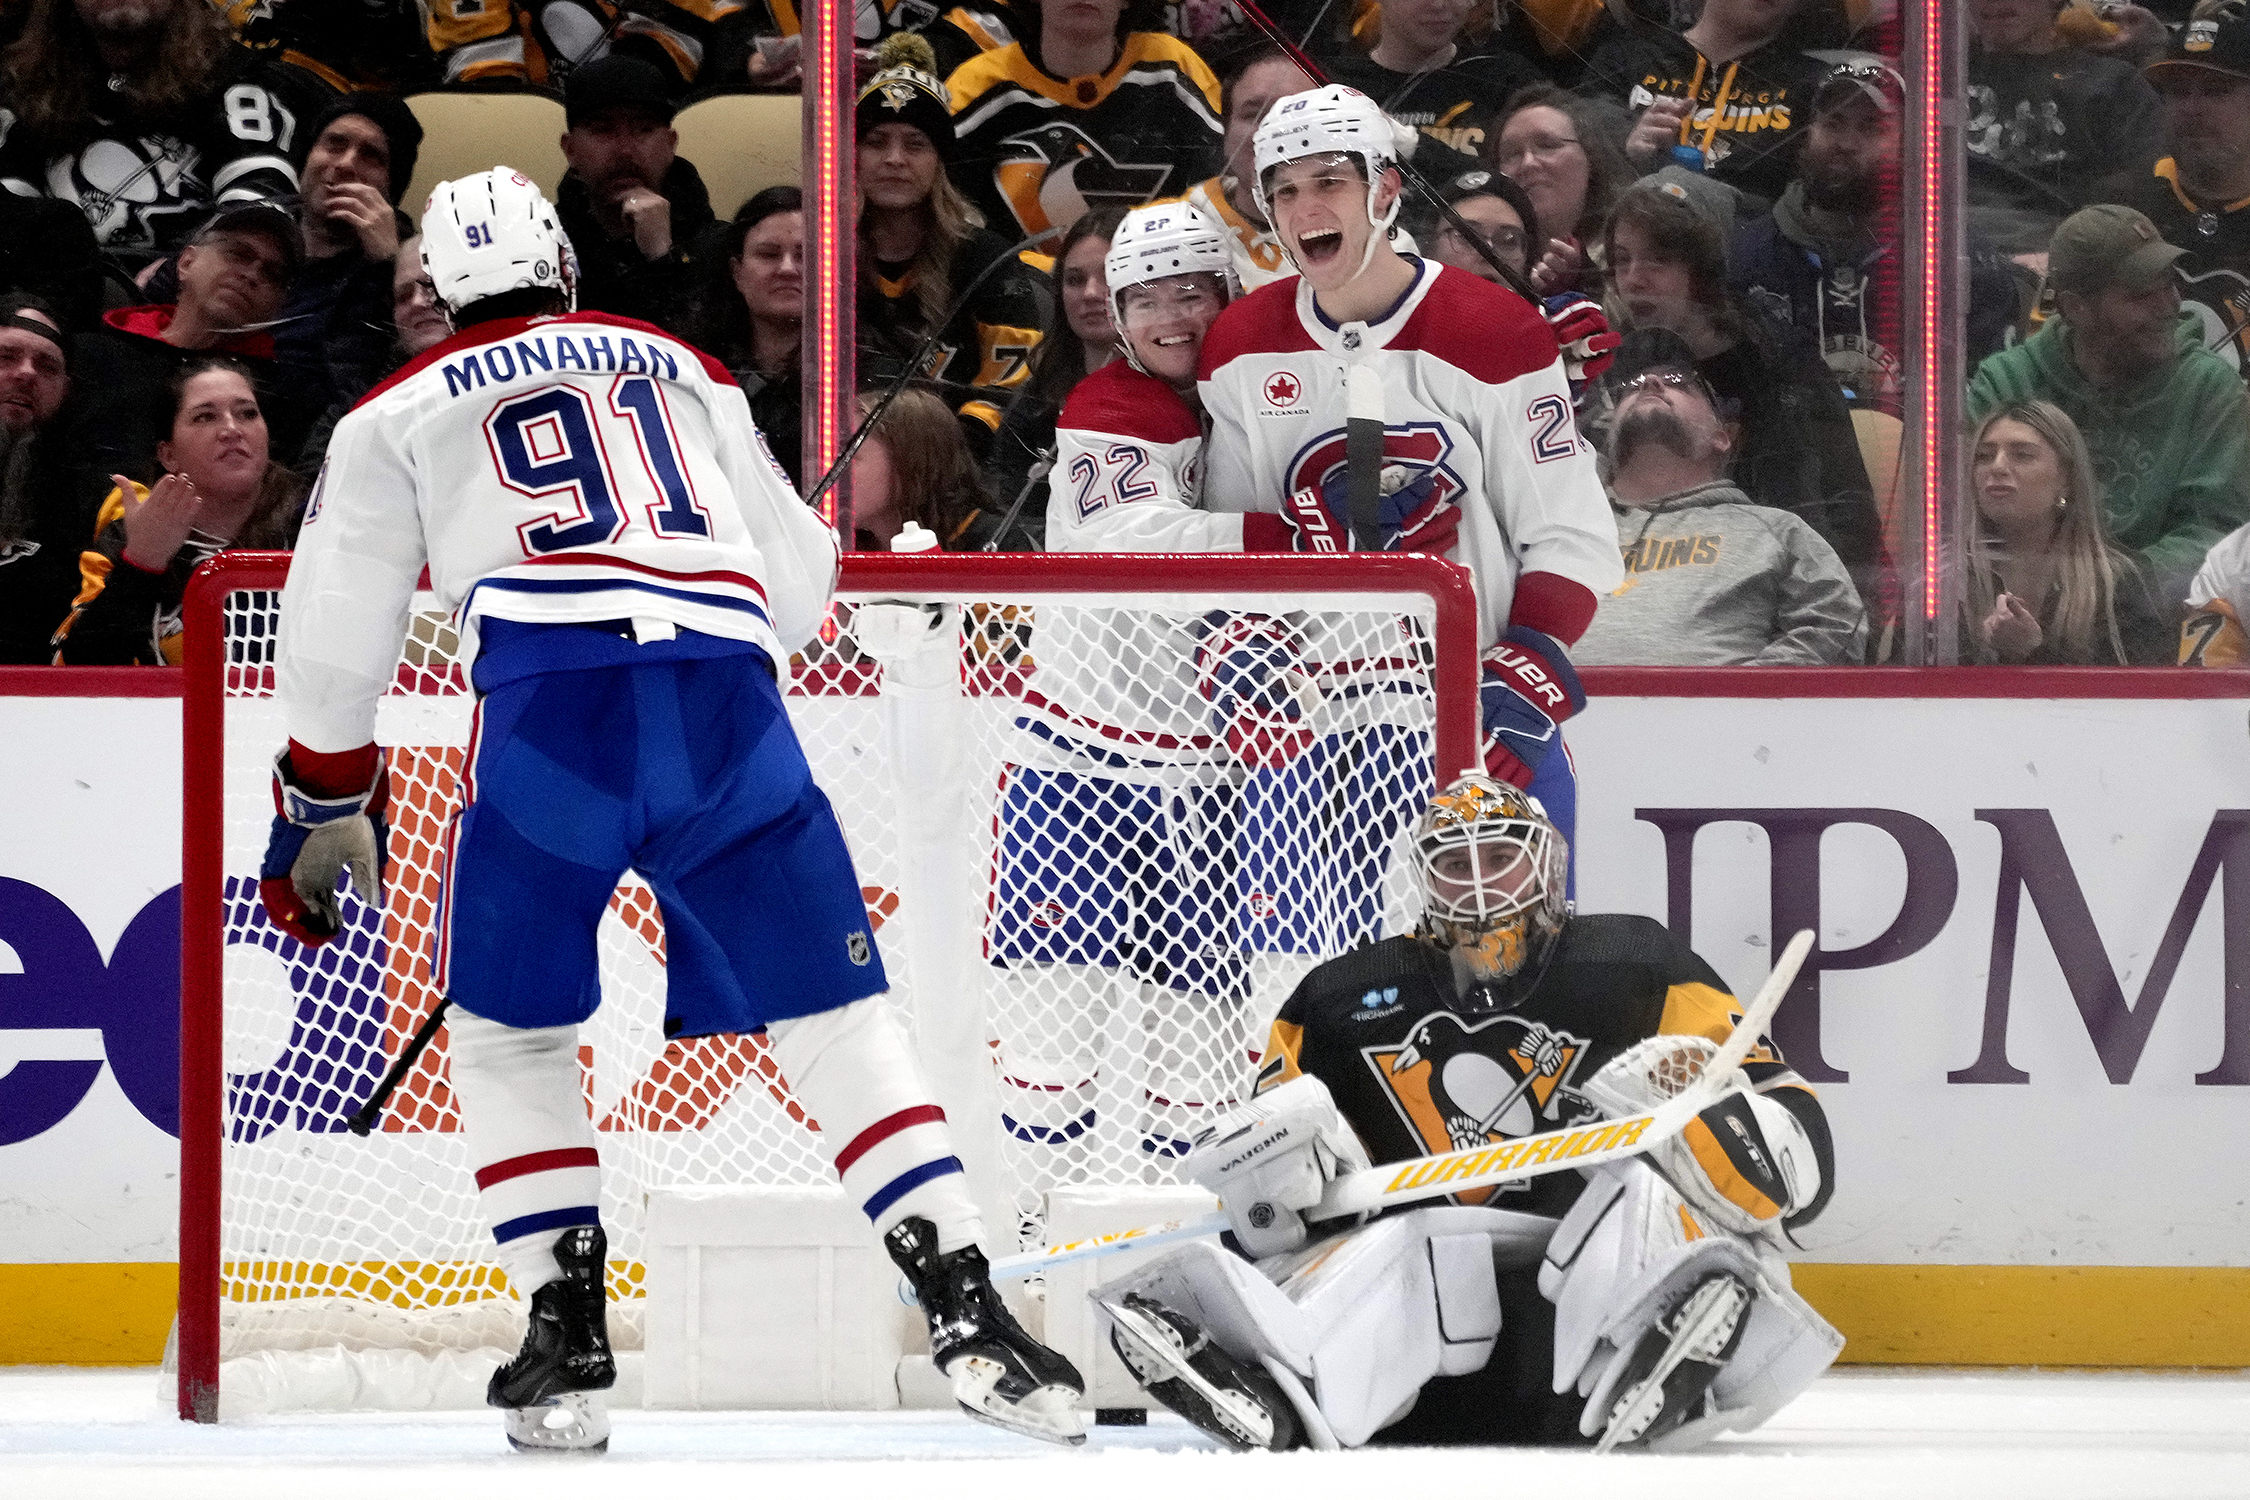 Call of the Wilde: Pittsburgh Penguins shade Montreal Canadiens in OT